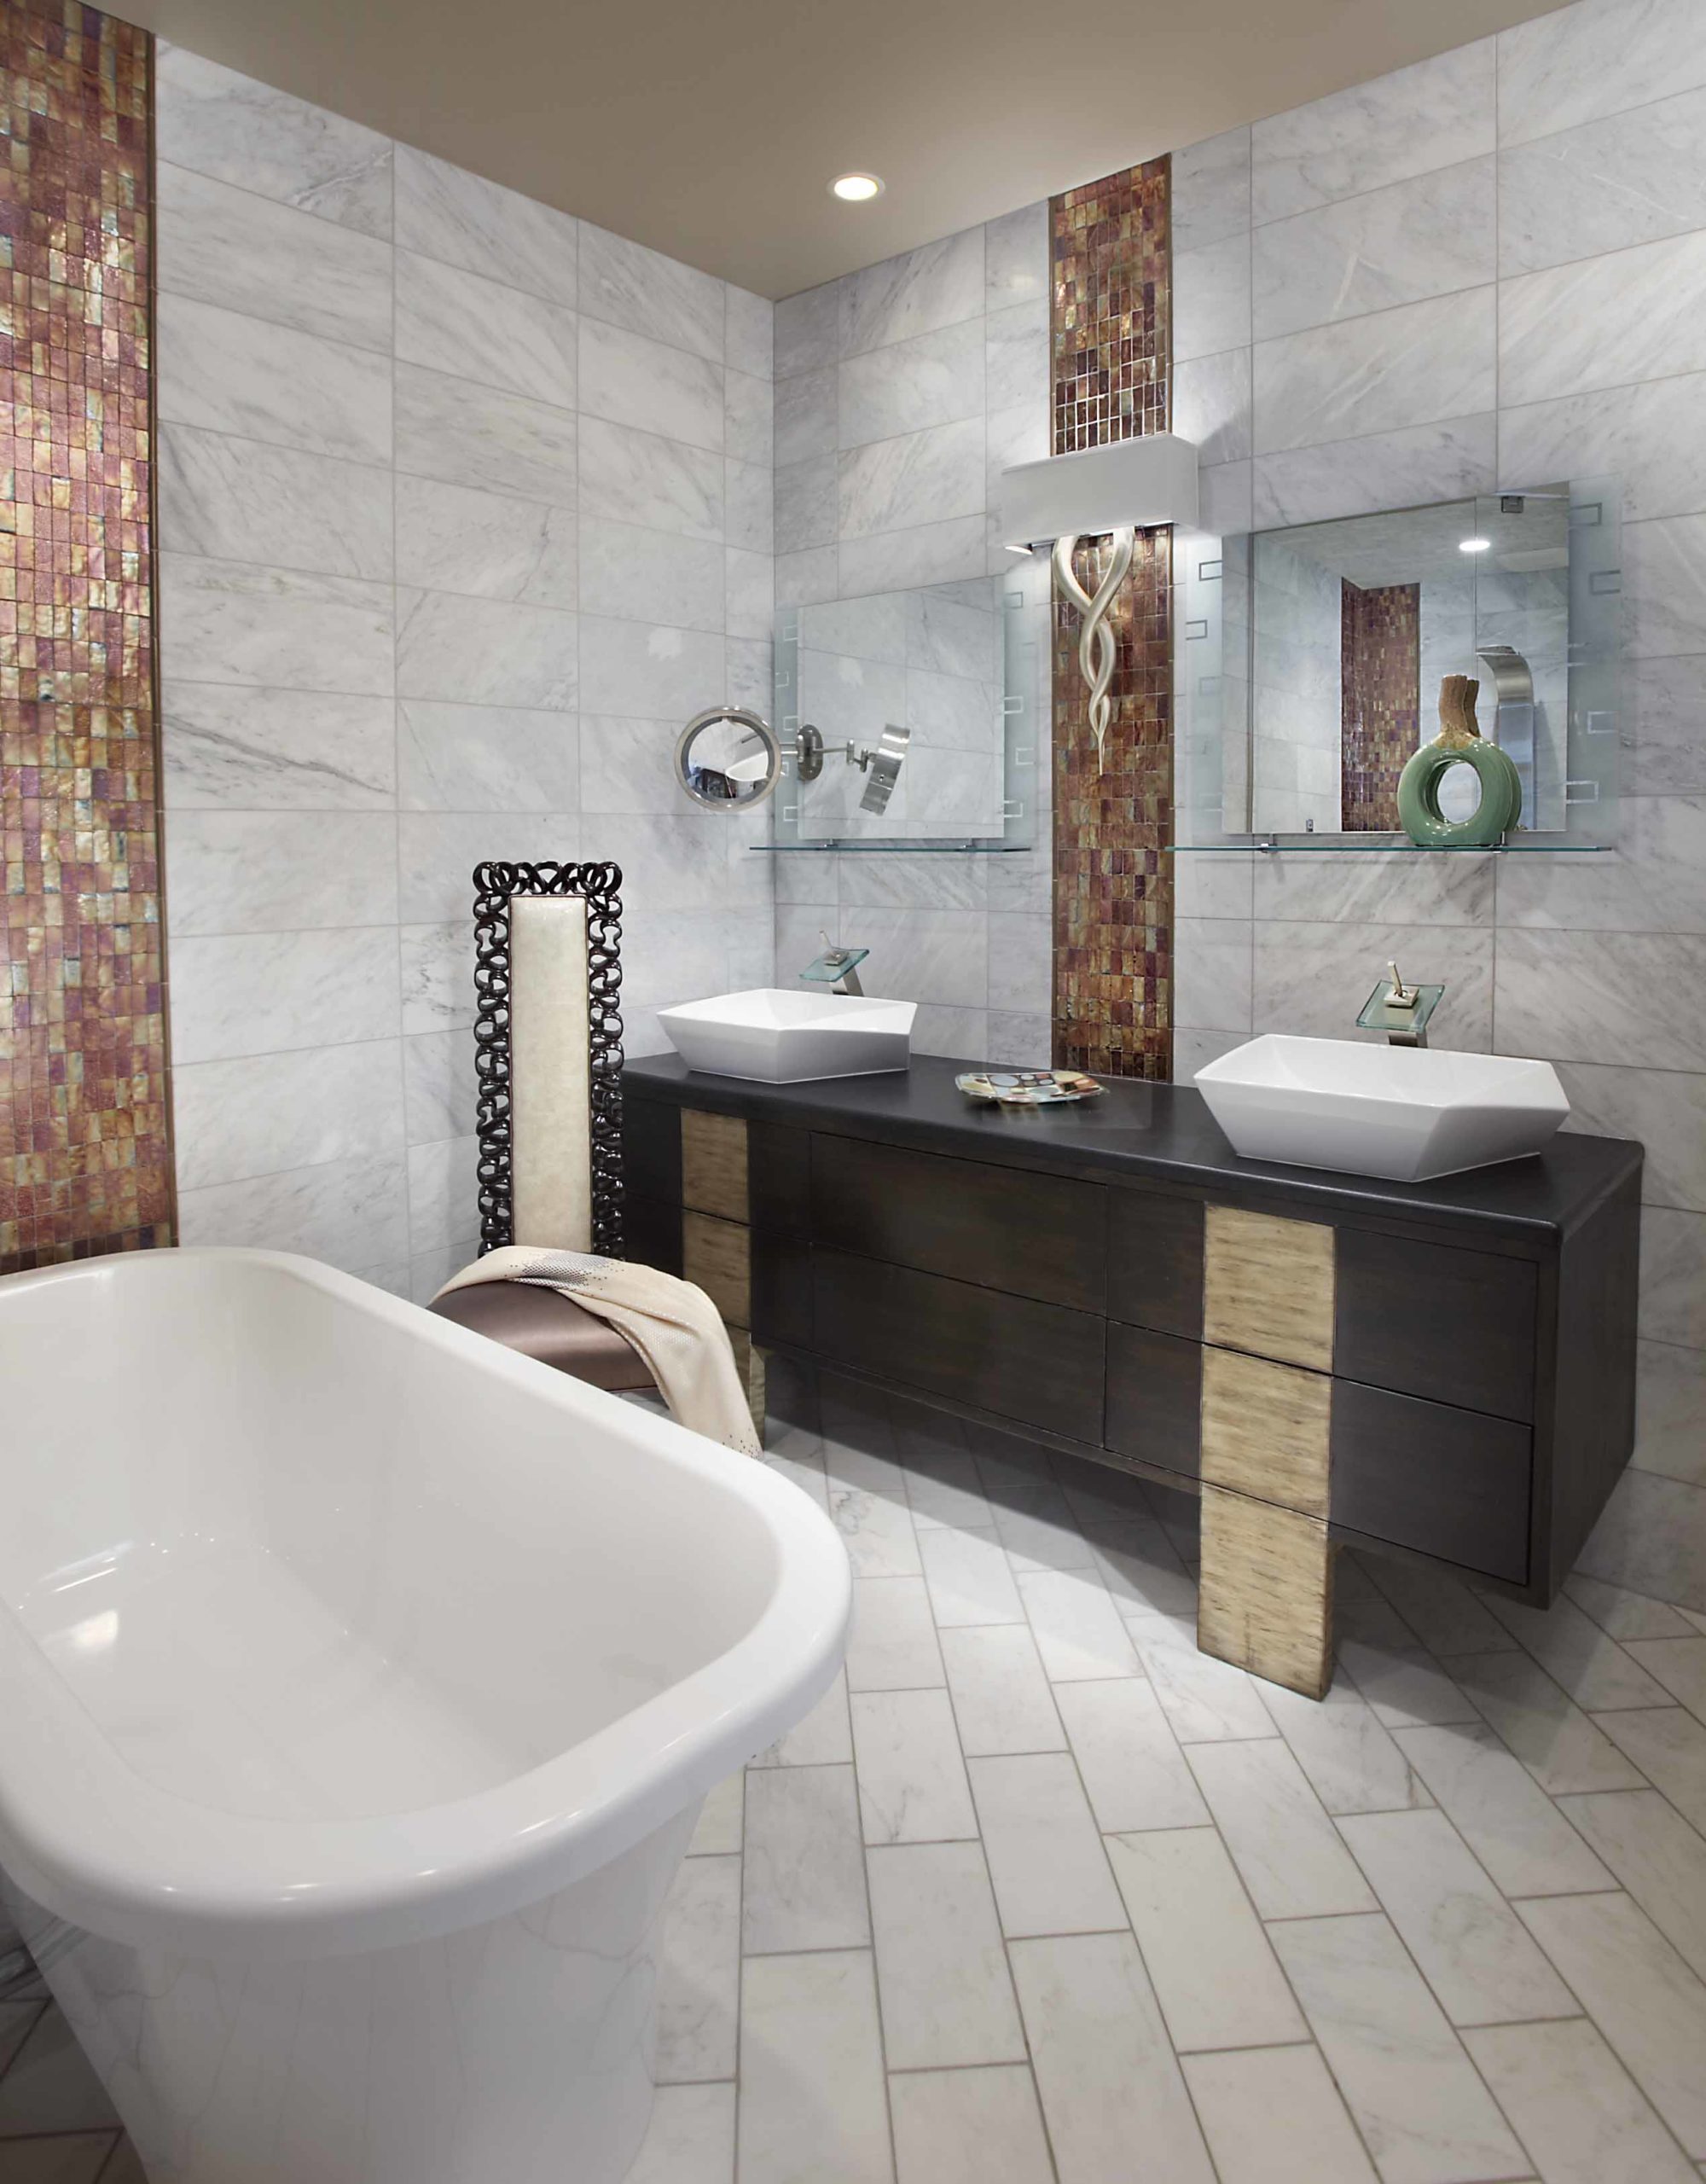 Bathroom with white tiled floors and walls and a claw-foot bathtub